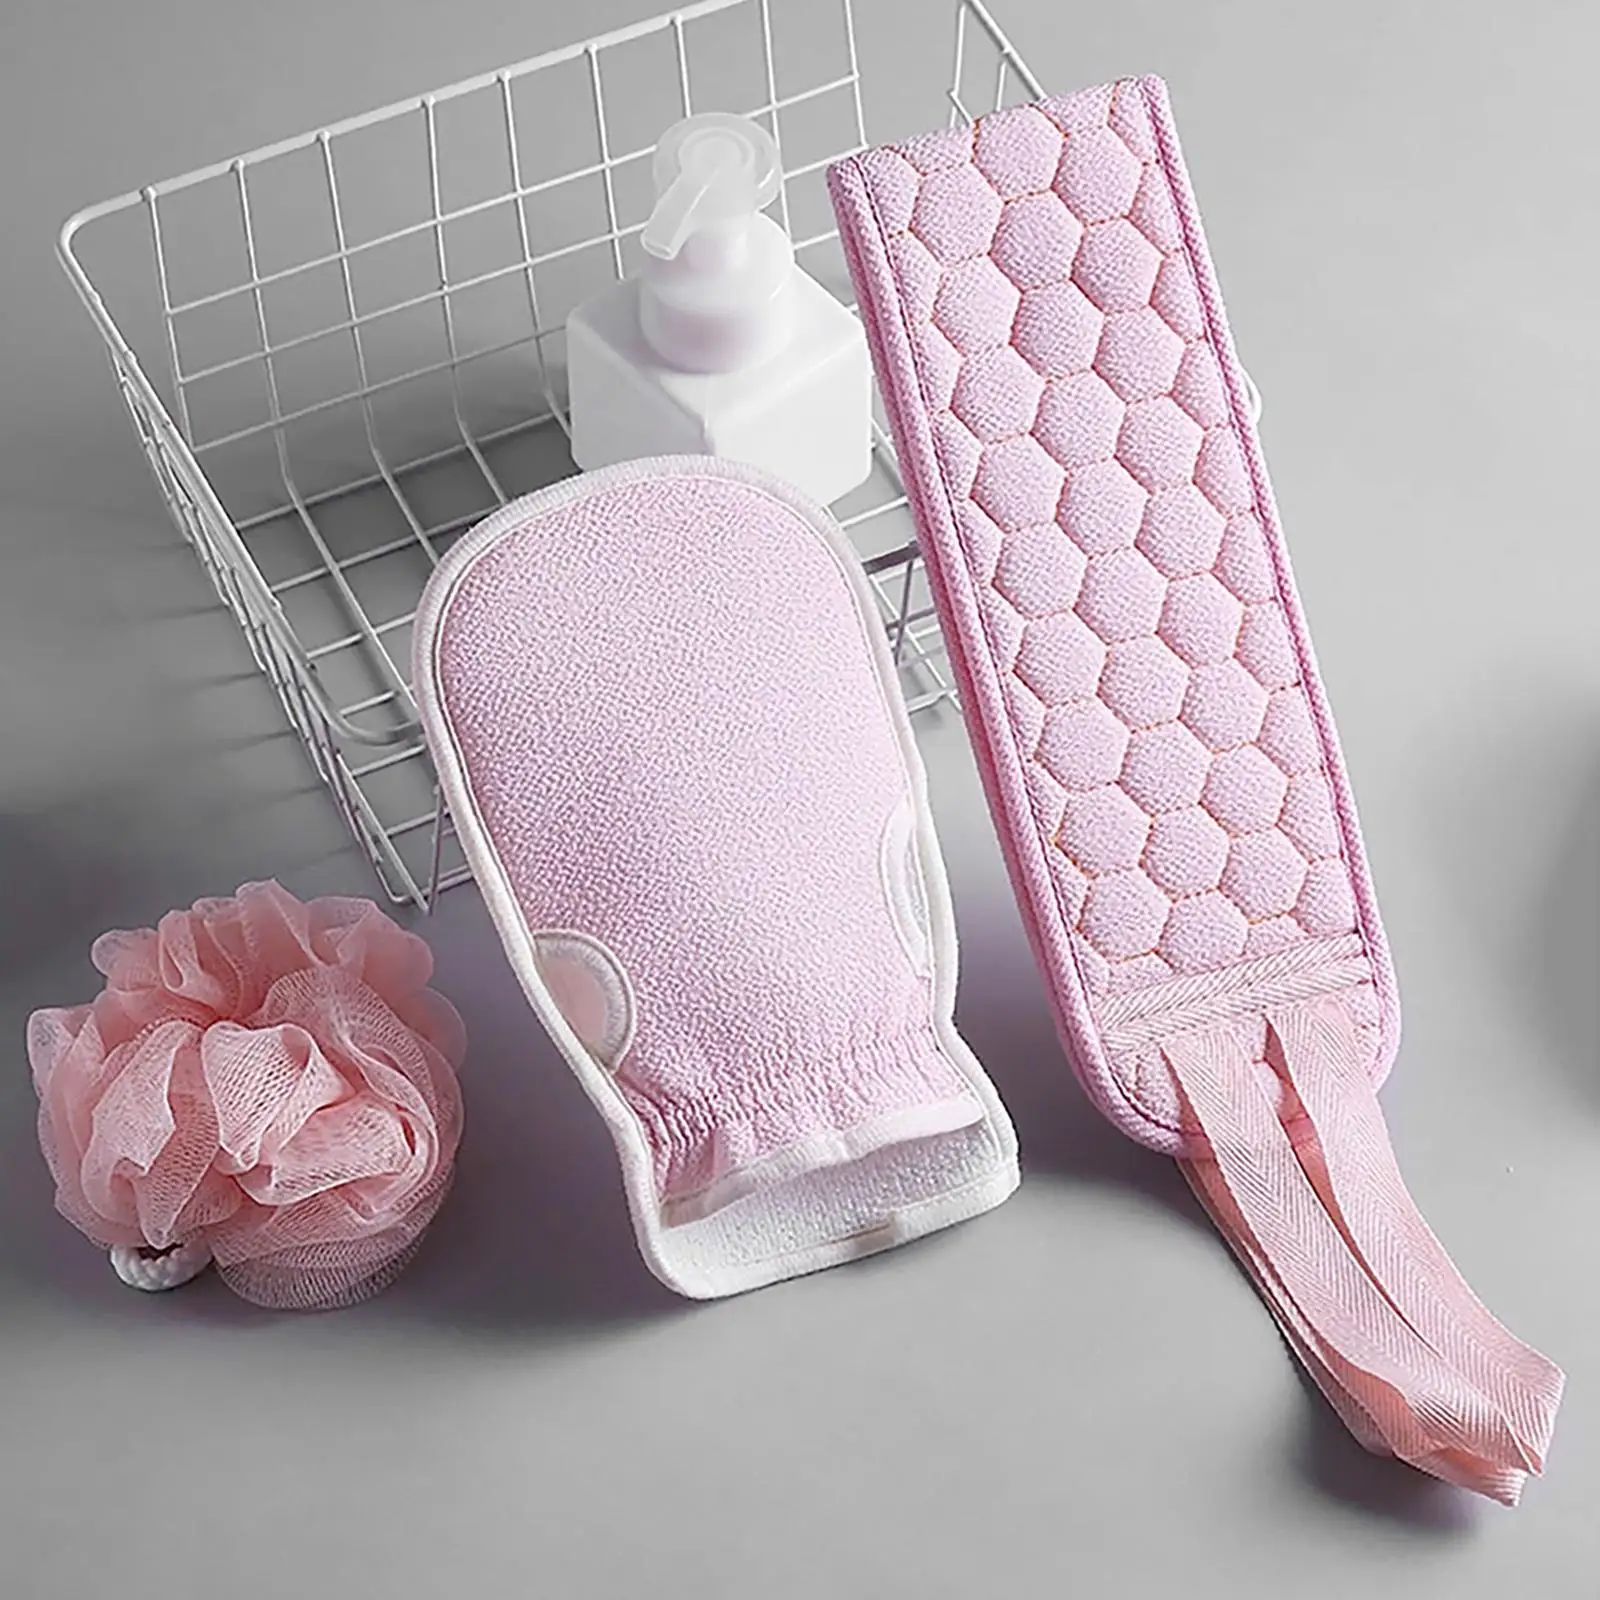 3x Body Scrubber SPA Tool Set Bath Accessories Skincare Tool Set Bath Shower Mitts exfoliating towels Set for Bathroom Outside